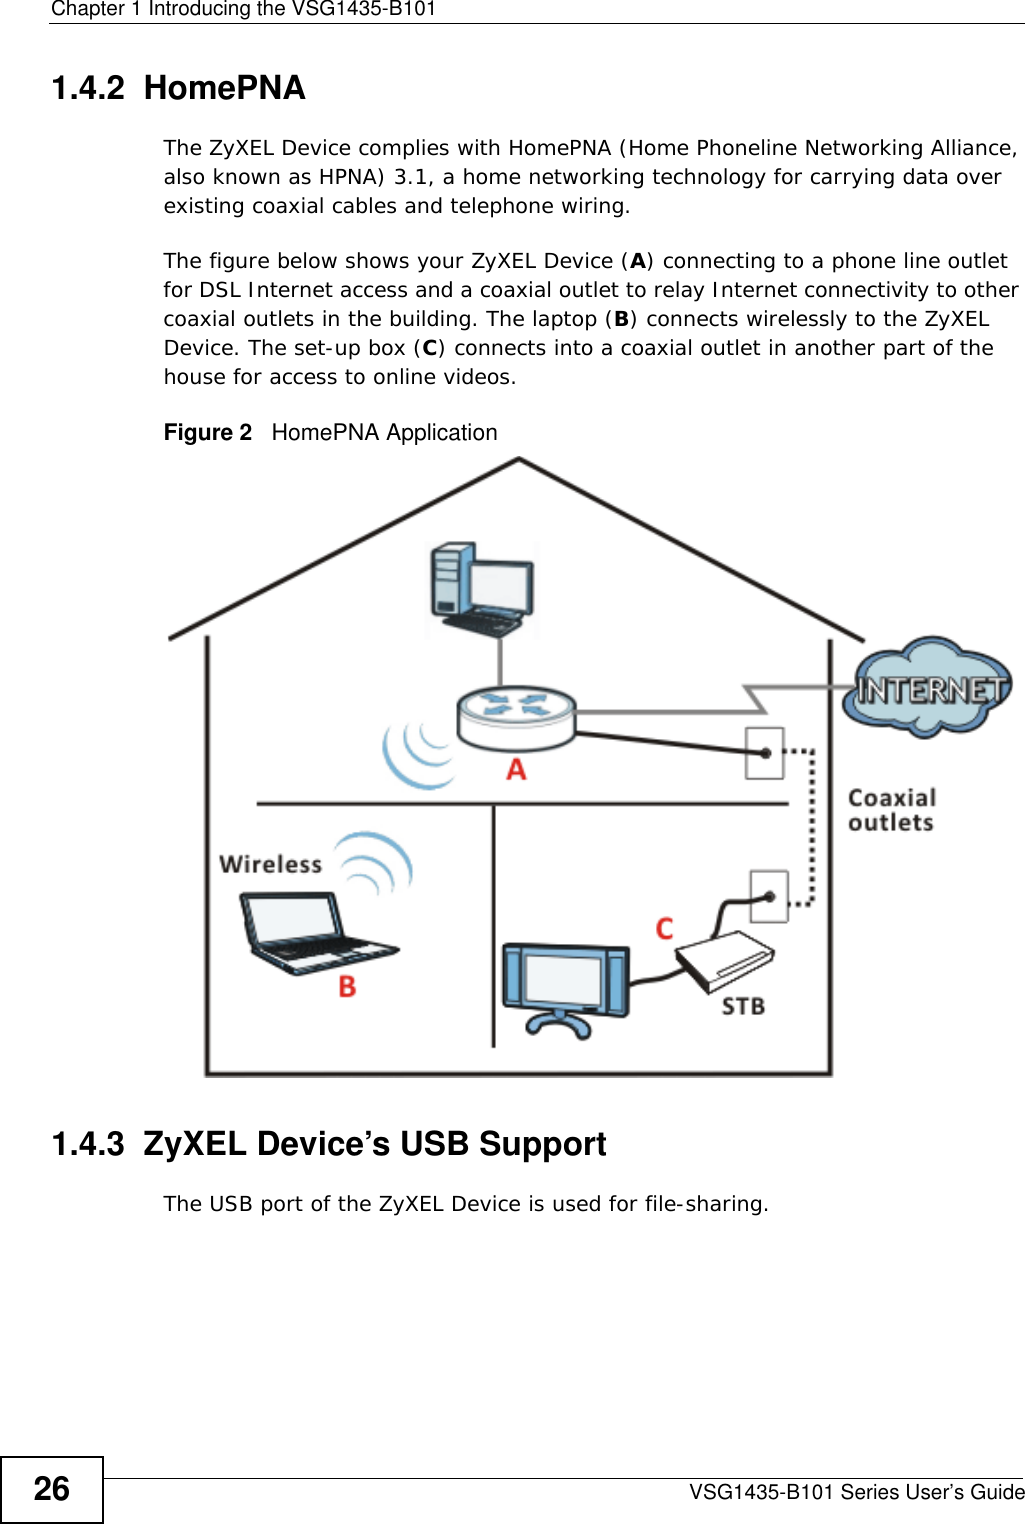 Chapter 1 Introducing the VSG1435-B101VSG1435-B101 Series User’s Guide261.4.2  HomePNAThe ZyXEL Device complies with HomePNA (Home Phoneline Networking Alliance, also known as HPNA) 3.1, a home networking technology for carrying data over existing coaxial cables and telephone wiring.The figure below shows your ZyXEL Device (A) connecting to a phone line outlet for DSL Internet access and a coaxial outlet to relay Internet connectivity to other coaxial outlets in the building. The laptop (B) connects wirelessly to the ZyXEL Device. The set-up box (C) connects into a coaxial outlet in another part of the house for access to online videos.Figure 2   HomePNA Application 1.4.3  ZyXEL Device’s USB SupportThe USB port of the ZyXEL Device is used for file-sharing.